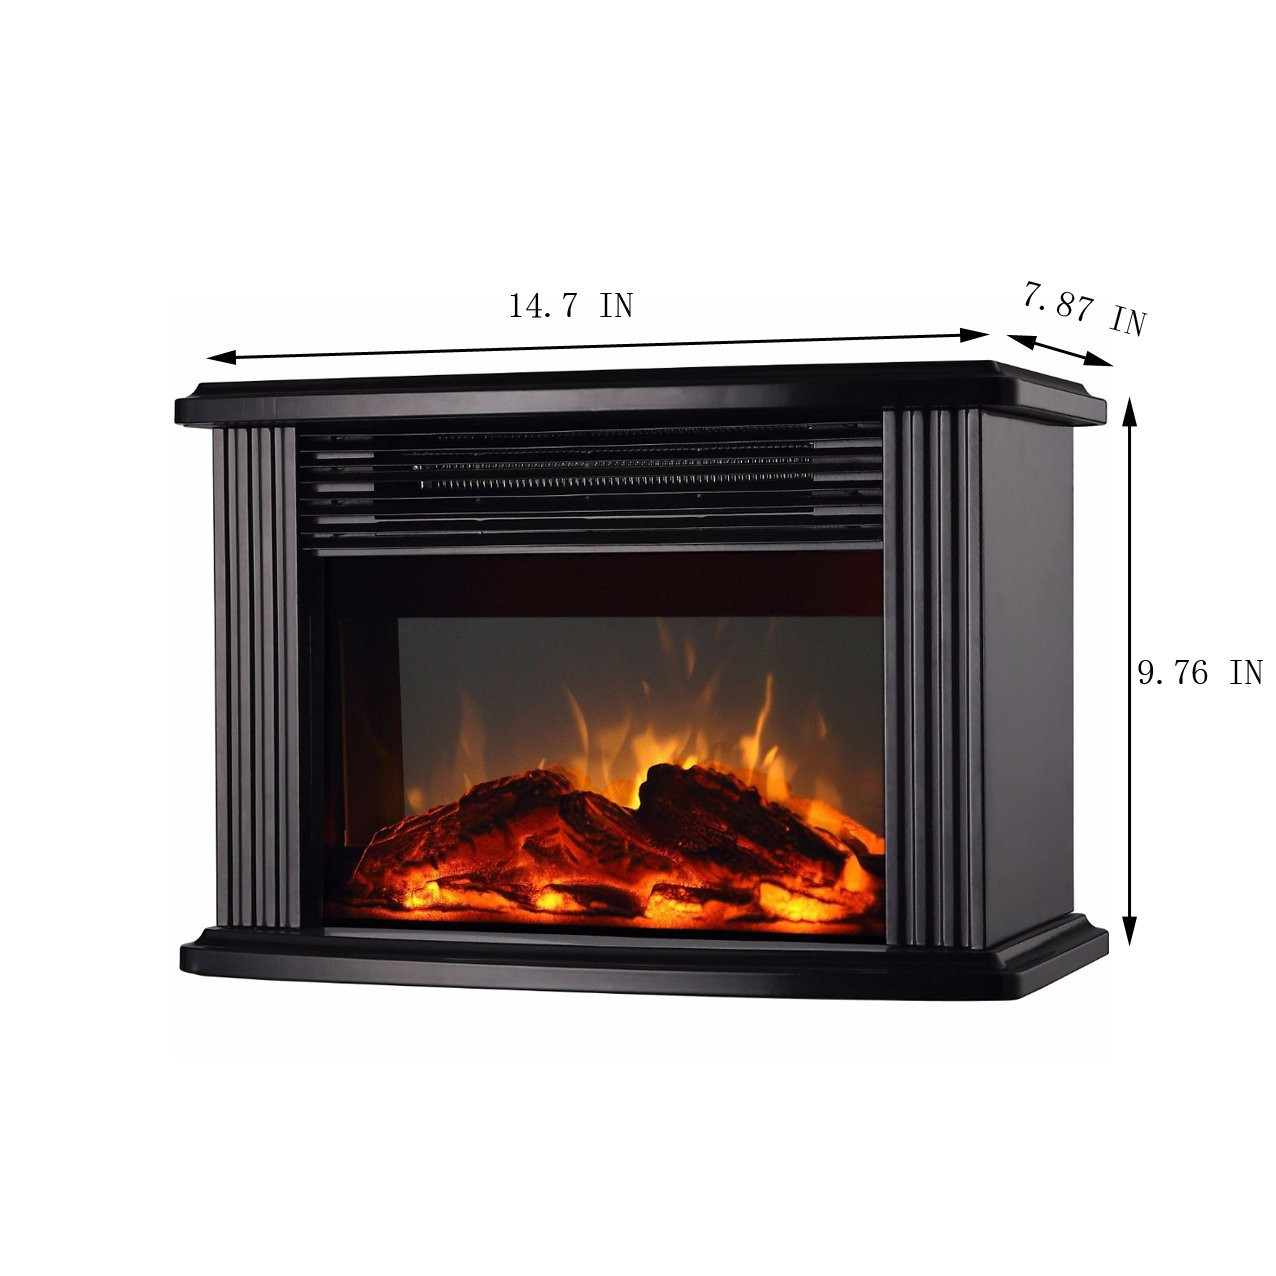 Mini Electric Fireplace Heater
 DONYER POWER 14" Mini Electric Fireplace Tabletop Portable